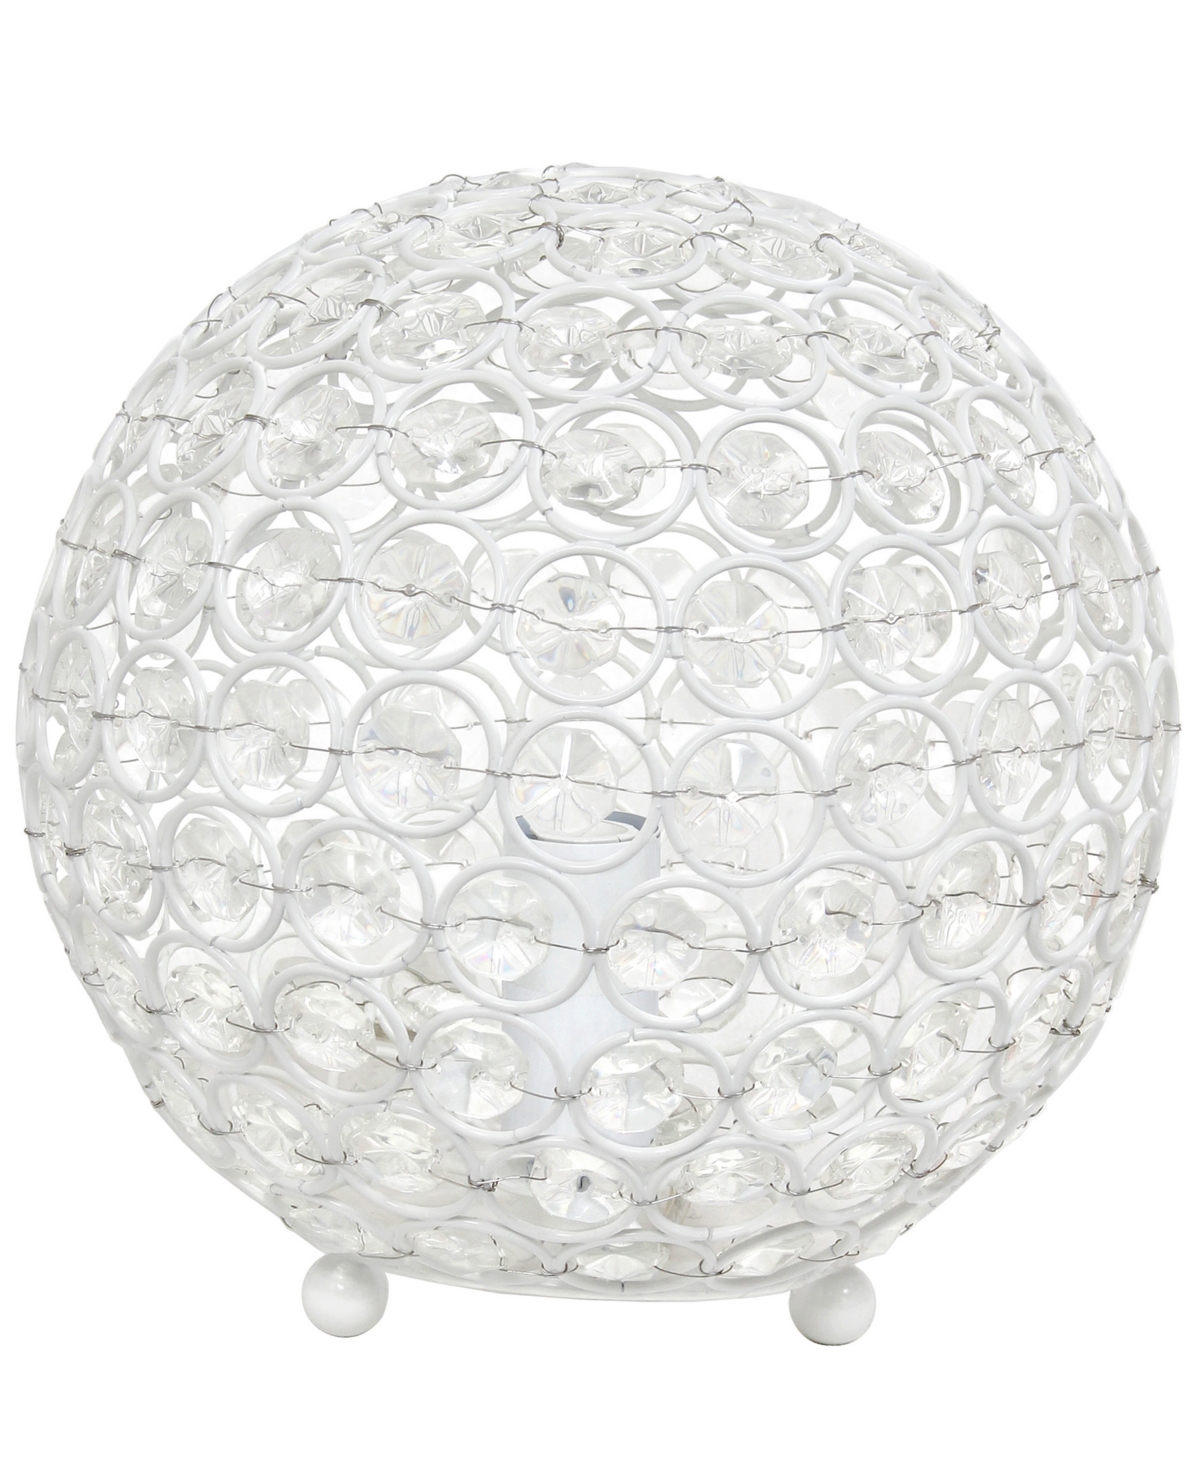 ALL THE RAGES LALIA HOME ELIPSE 8" METAL CRYSTAL ORB TABLE LAMP